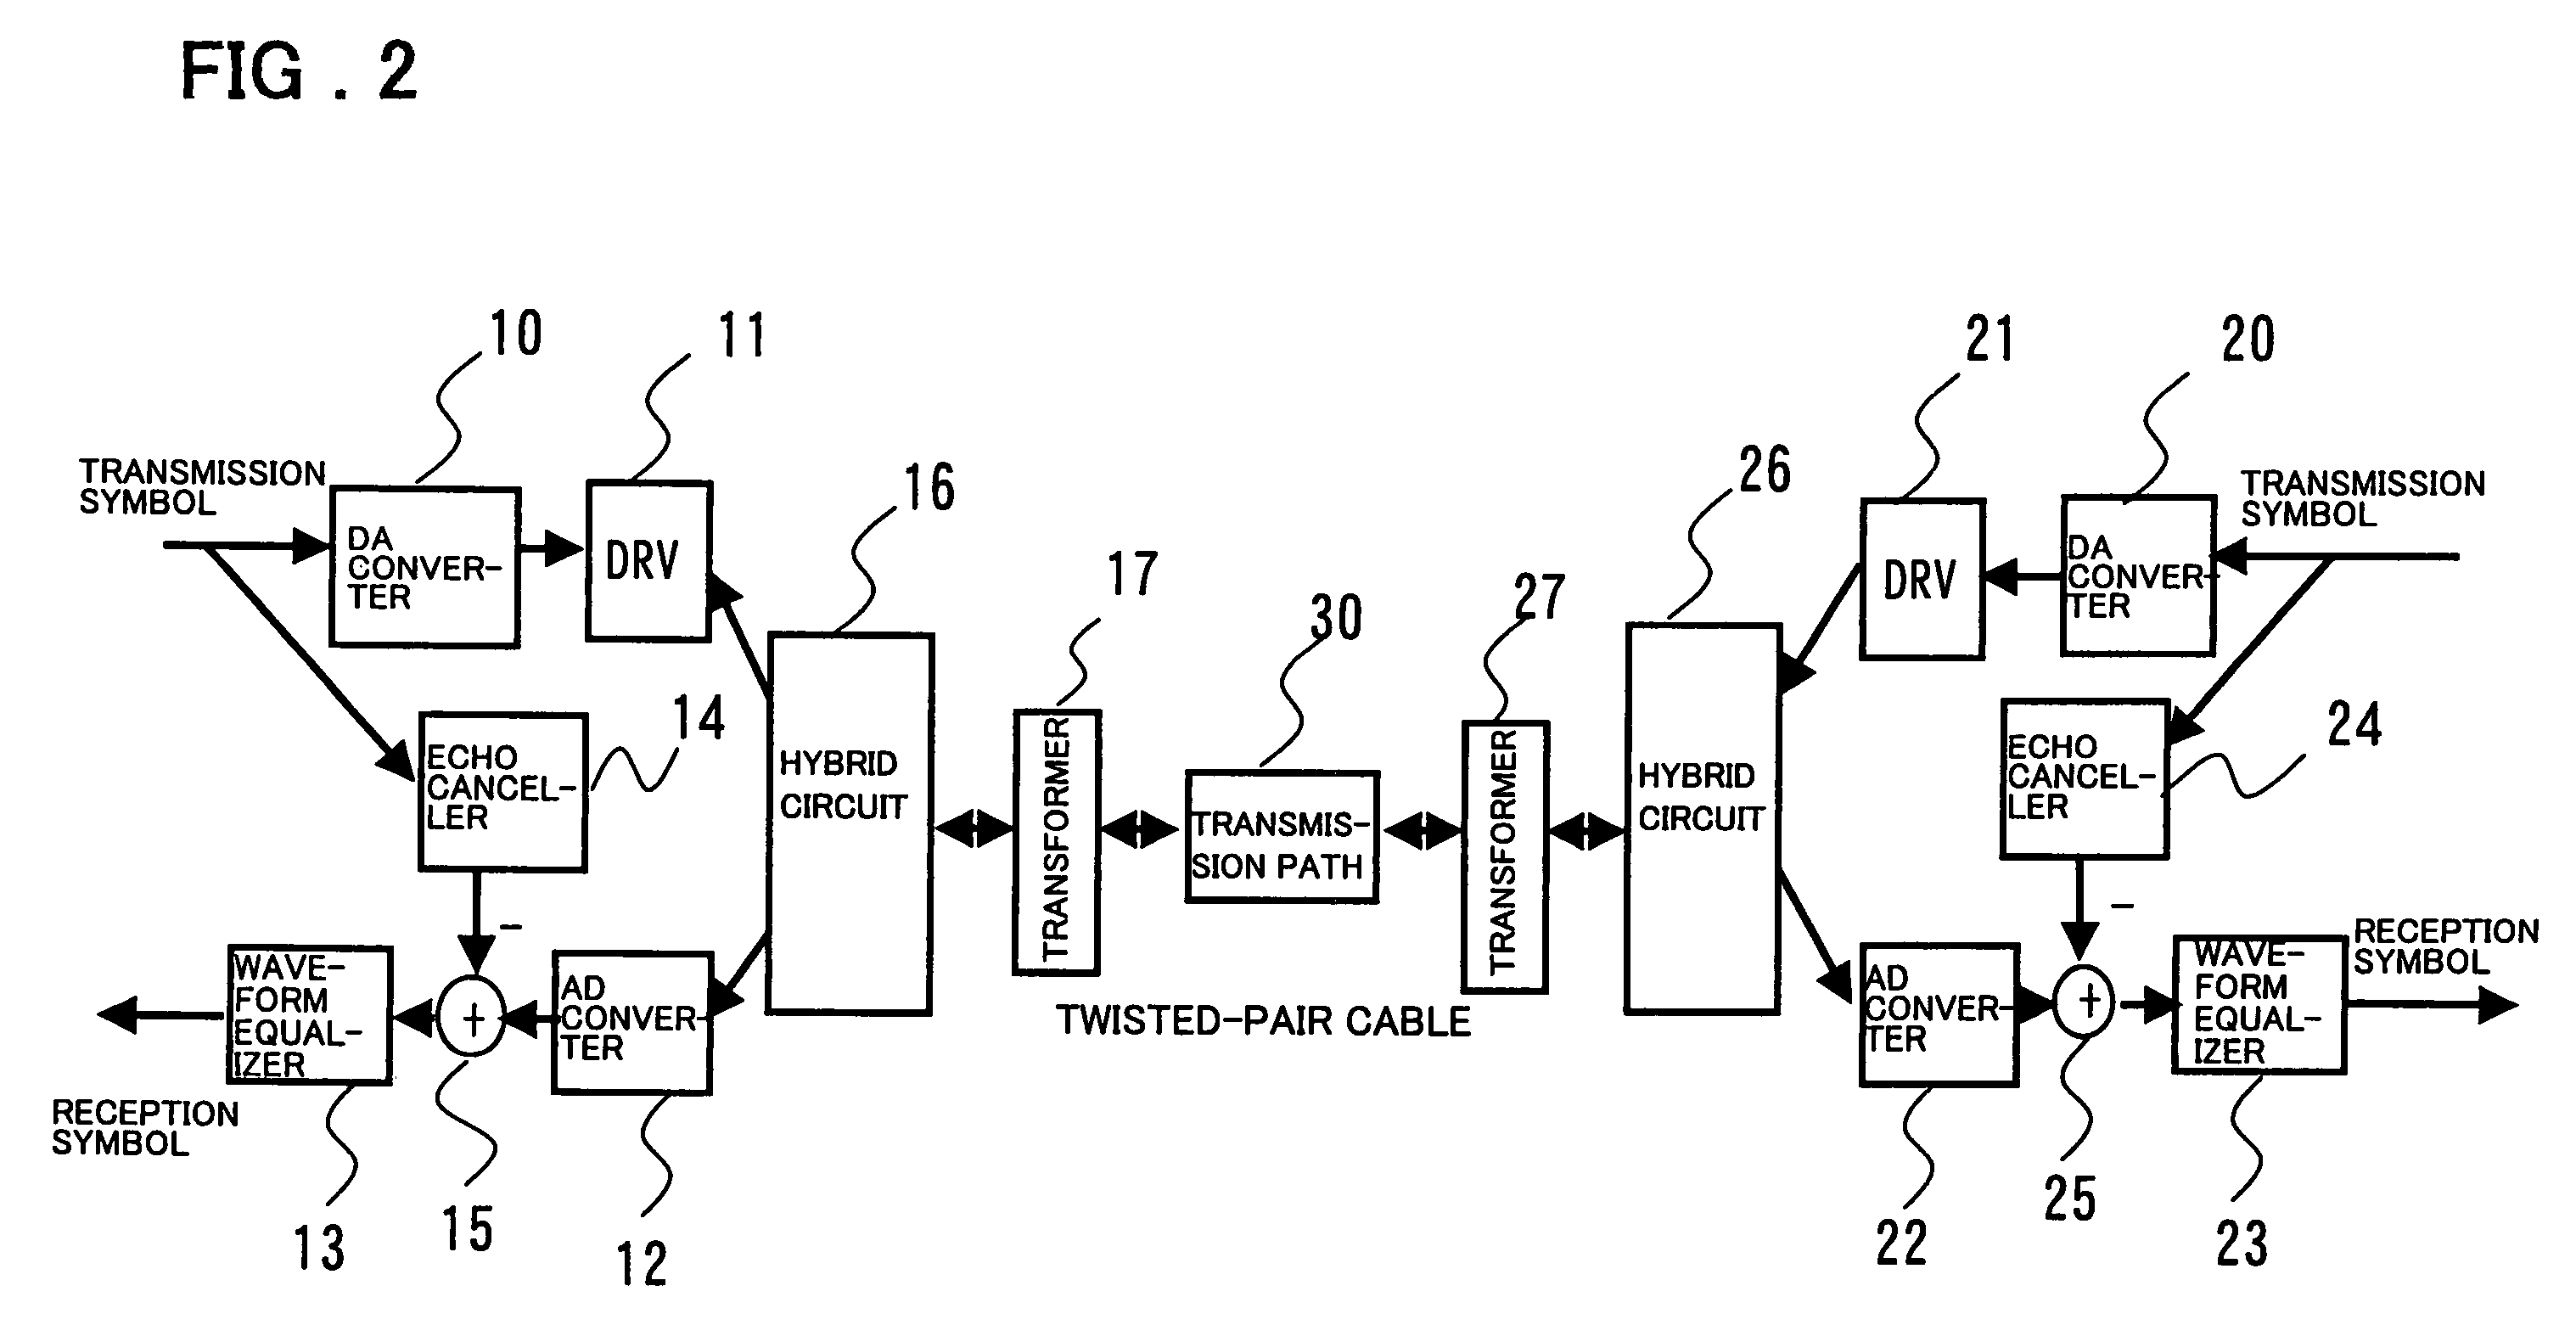 Canceller device and data transmission system